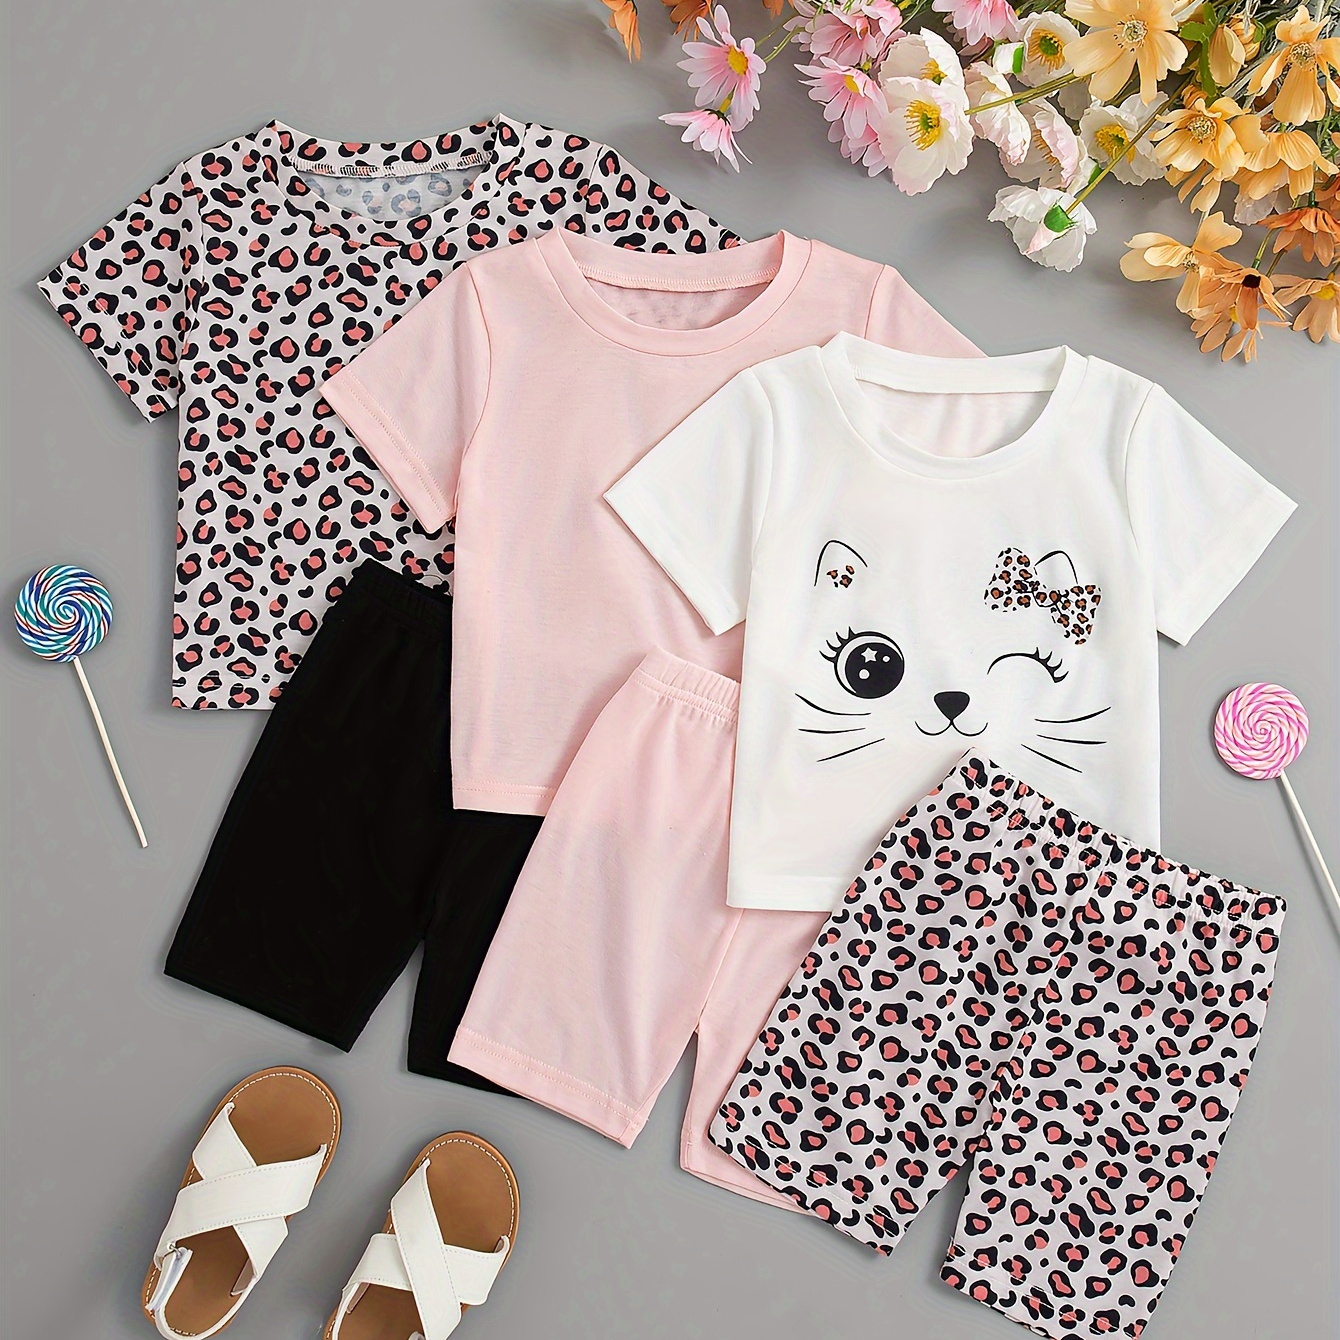 

3 Sets Baby's Short Sleeve Summer Outfit, T-shirt & Shorts Set, Solid Color & Cartoon Kitten & Leopard Pattern, Toddler & Infant Girl's Clothes For Daily/holiday, As Gift